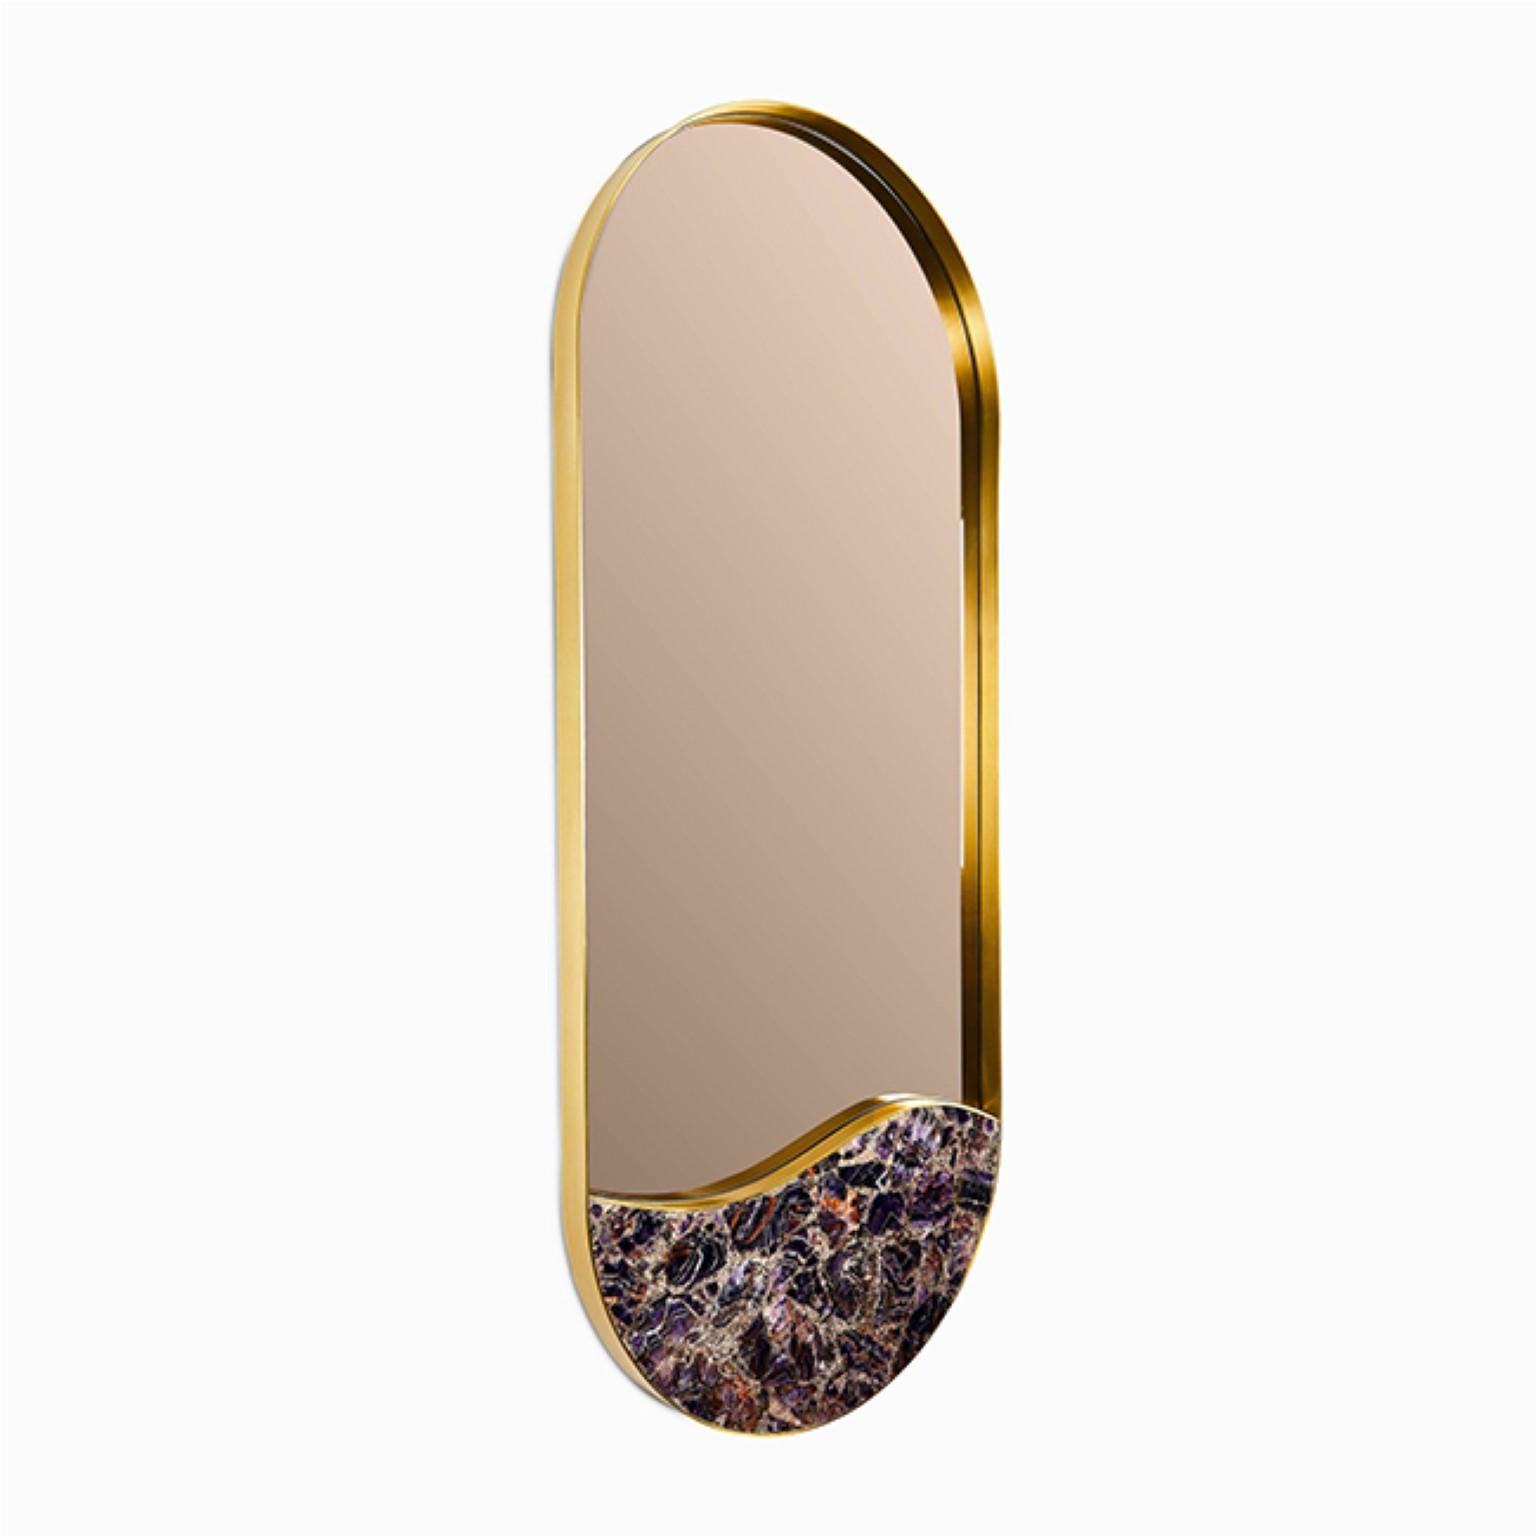 Onyx Kura mirror by Marble Balloon
Dimensions: W 50 x D 5 x H 120 cm
Materials: Brass, Onyx 

Inspired by the flow of Aras River, it combines 100% brass frame with semi-precious stone details. Semi-precious stones are available in either green